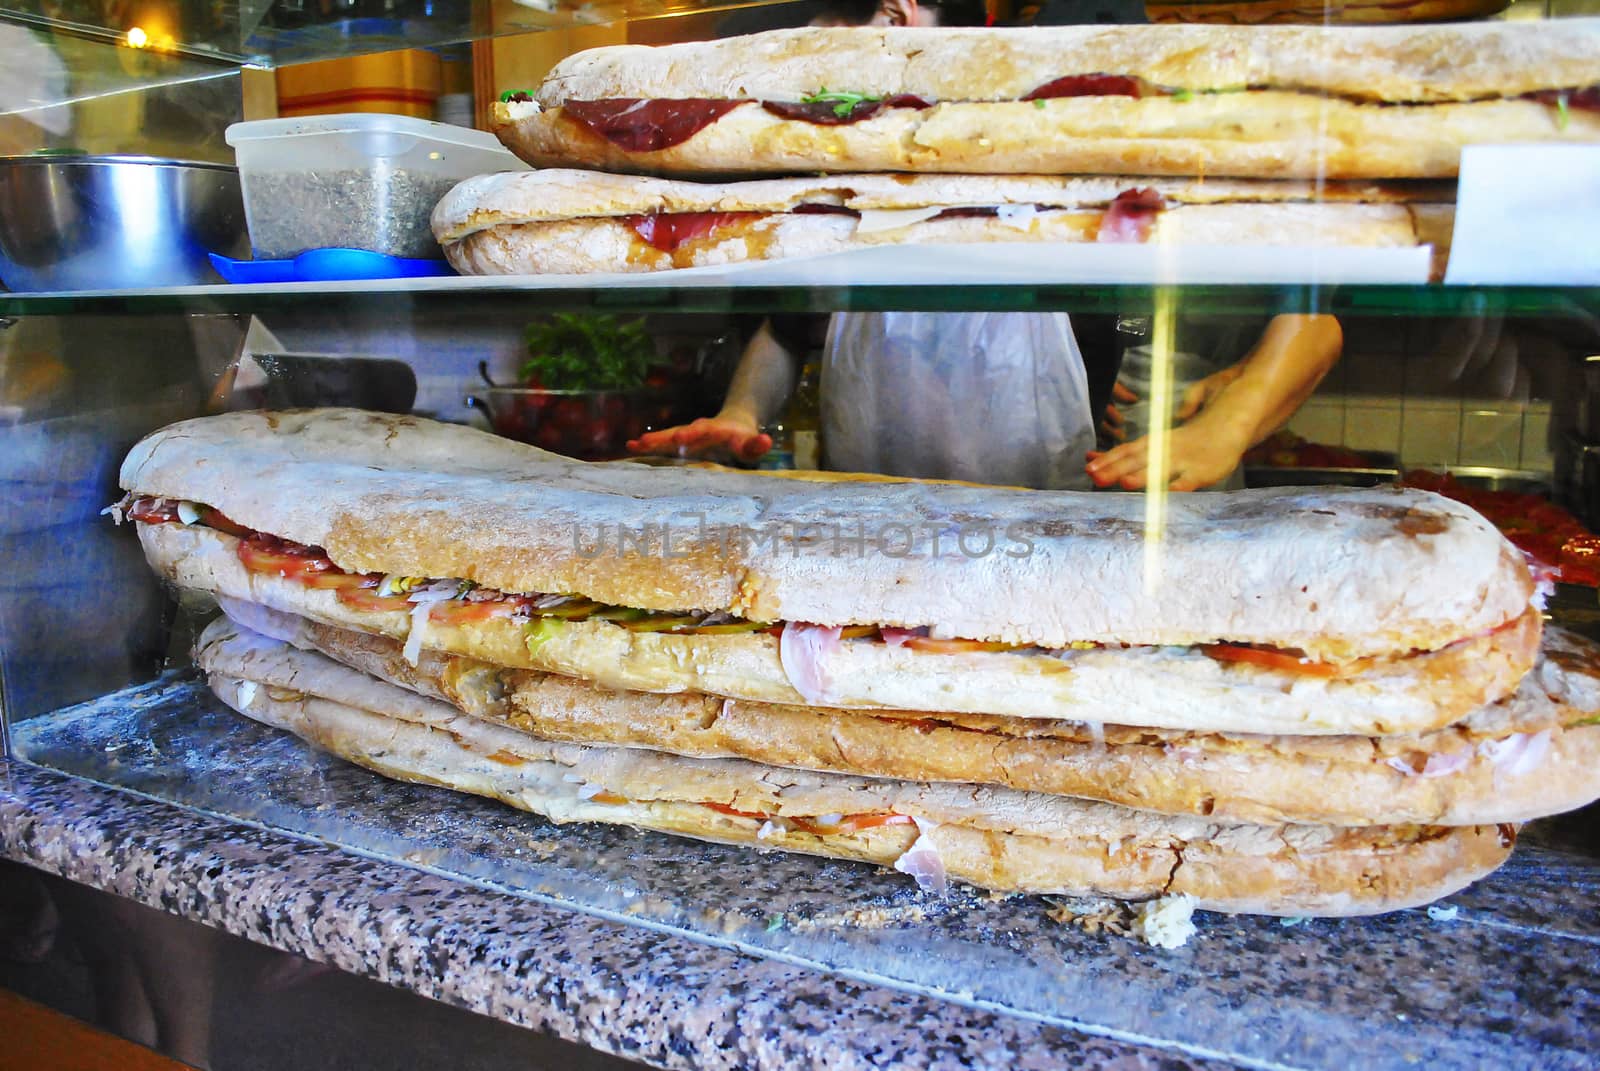 close-up view of a huge stuffed sandwich on a marble floor